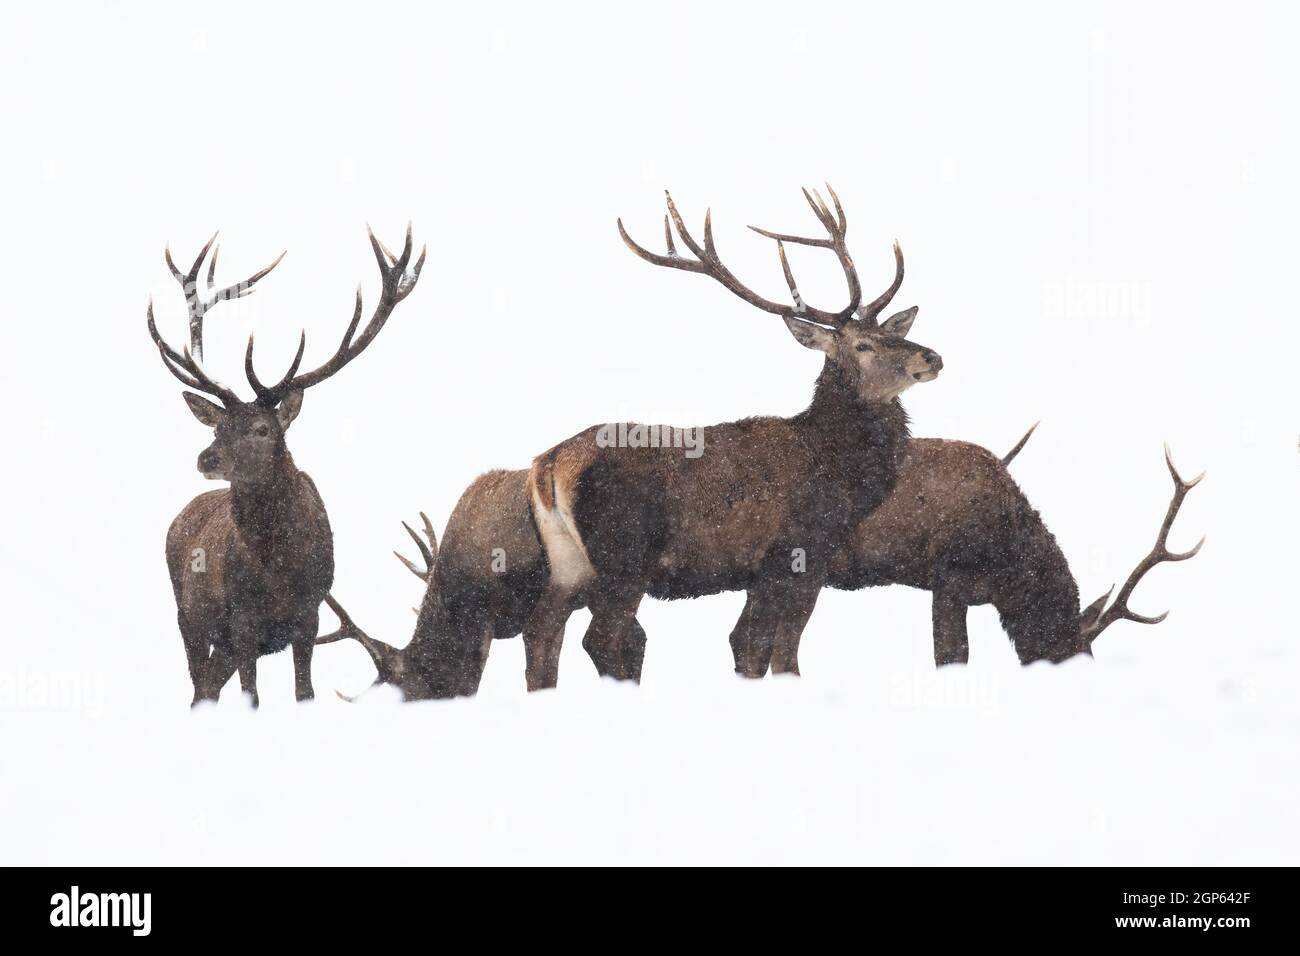 Group of red deer standing on snow isolated on white background Stock Photo